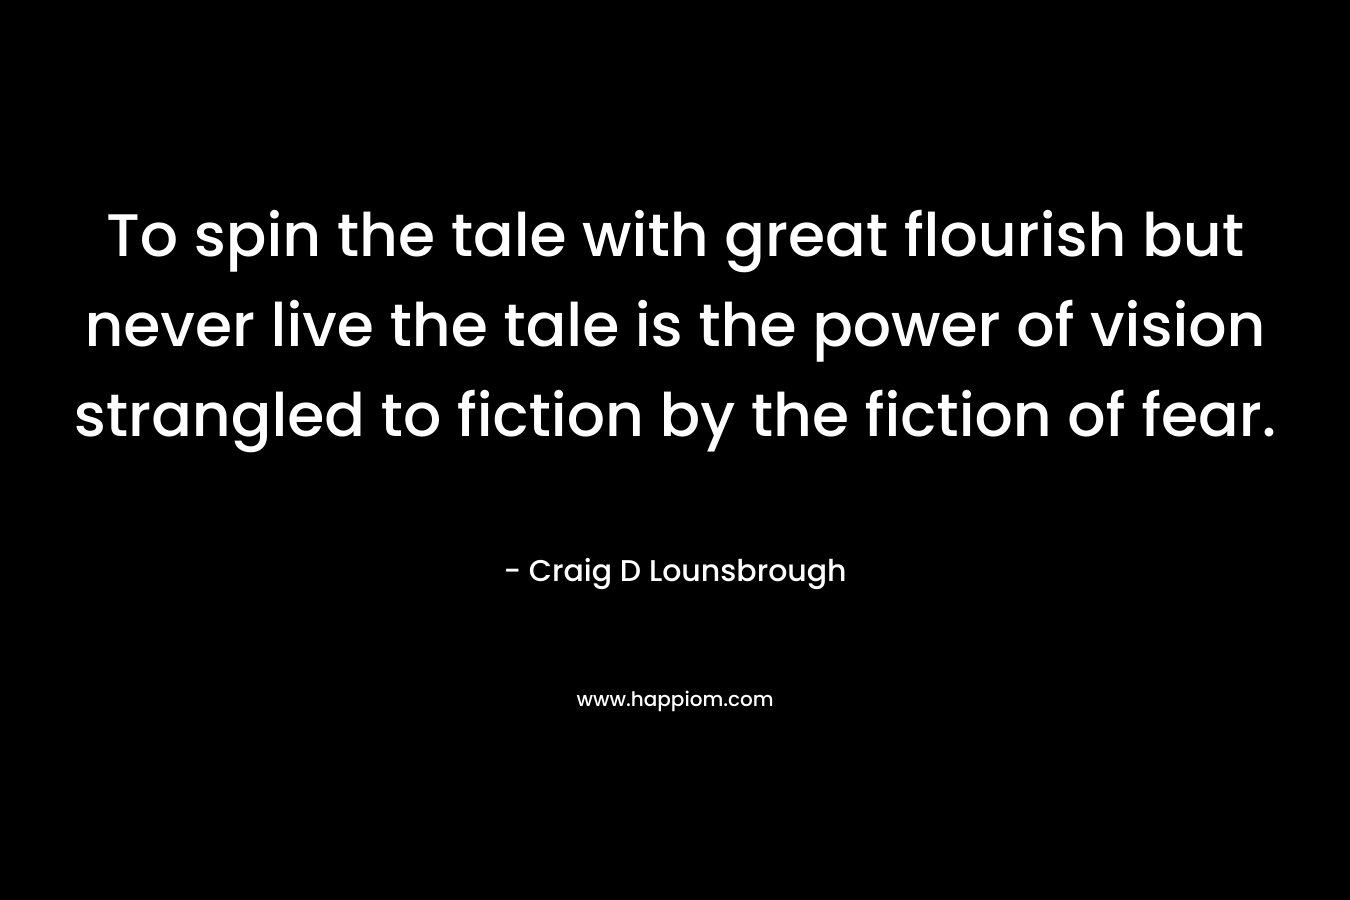 To spin the tale with great flourish but never live the tale is the power of vision strangled to fiction by the fiction of fear.